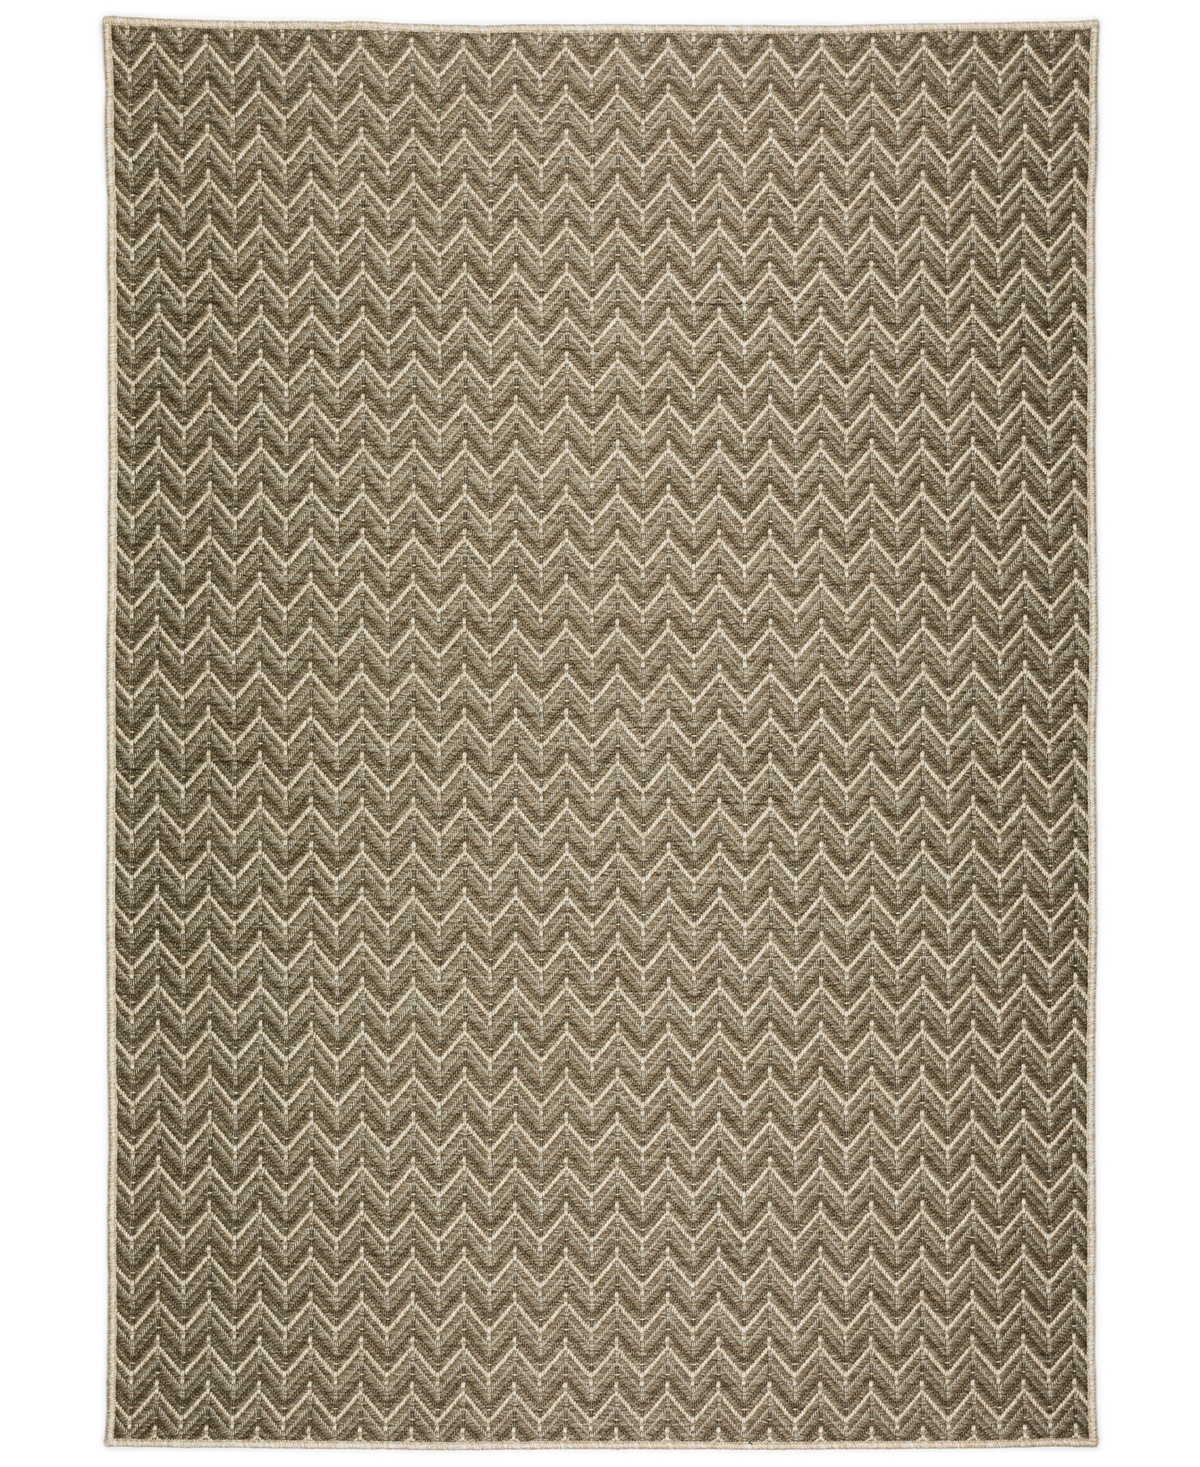 D Style Nusa Outdoor Nsa1 10' X 13' Area Rug In Gray